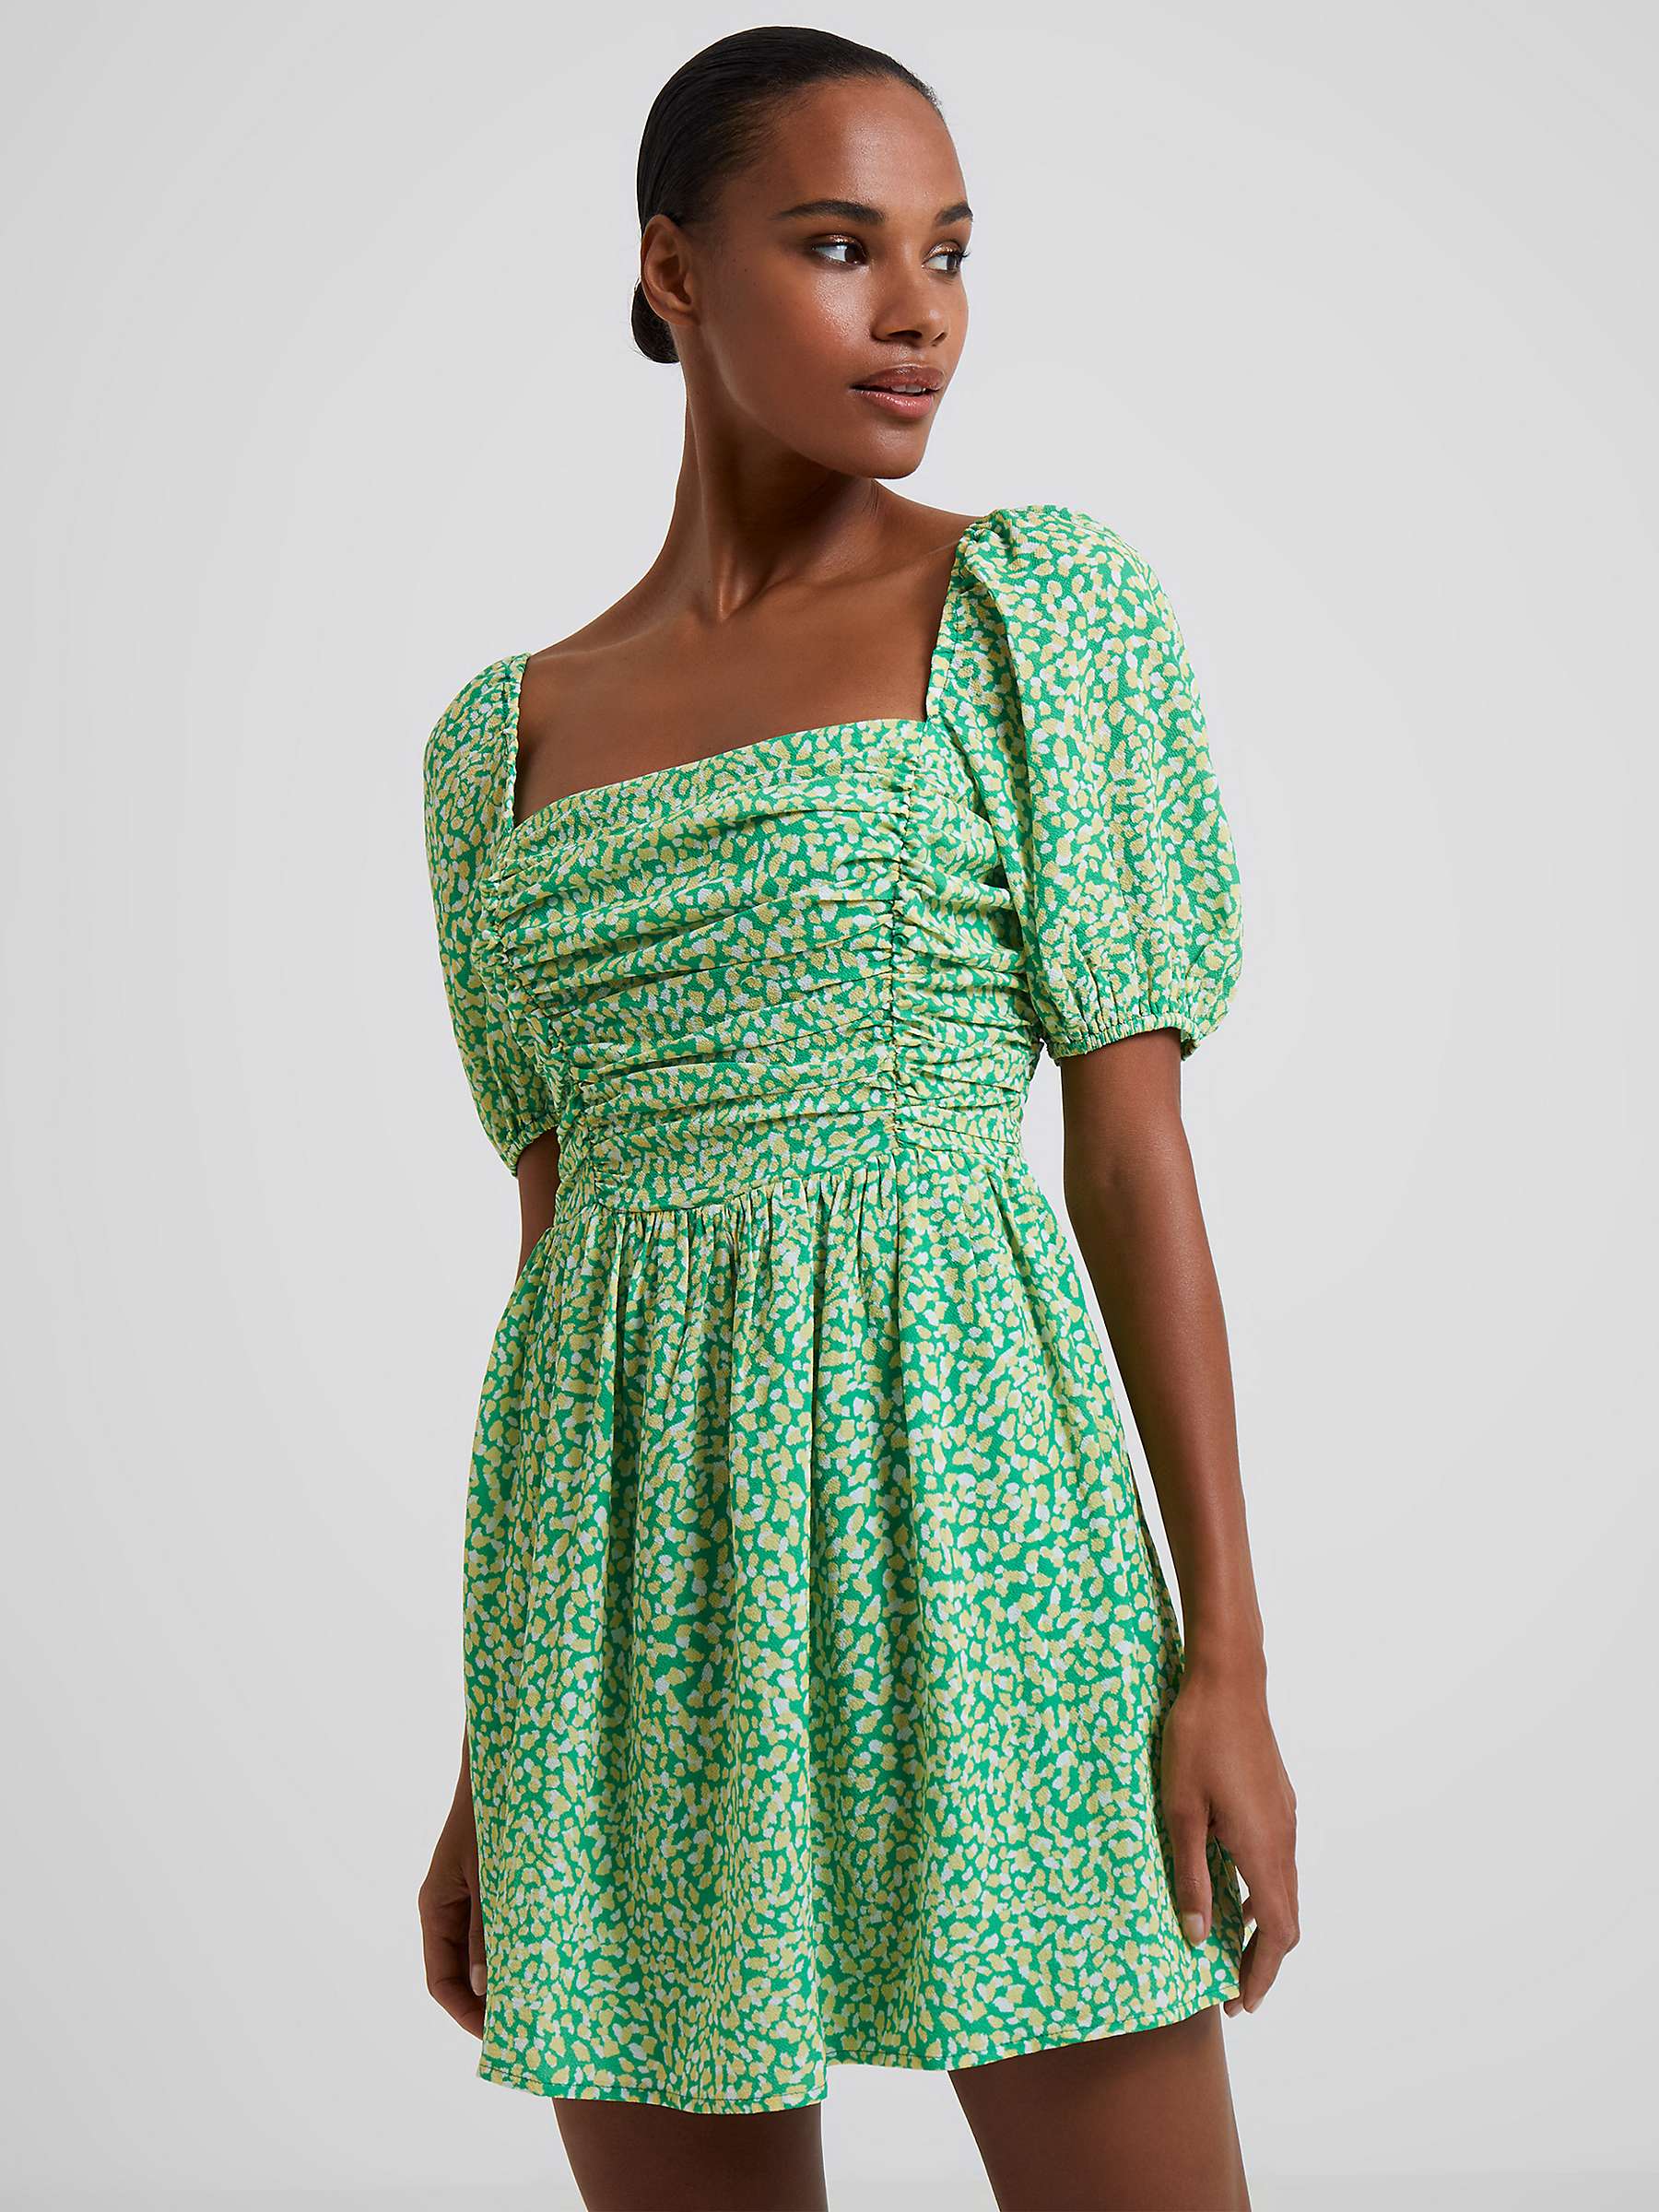 Buy French Connection Cadie Verona Mini Dress, Green Online at johnlewis.com